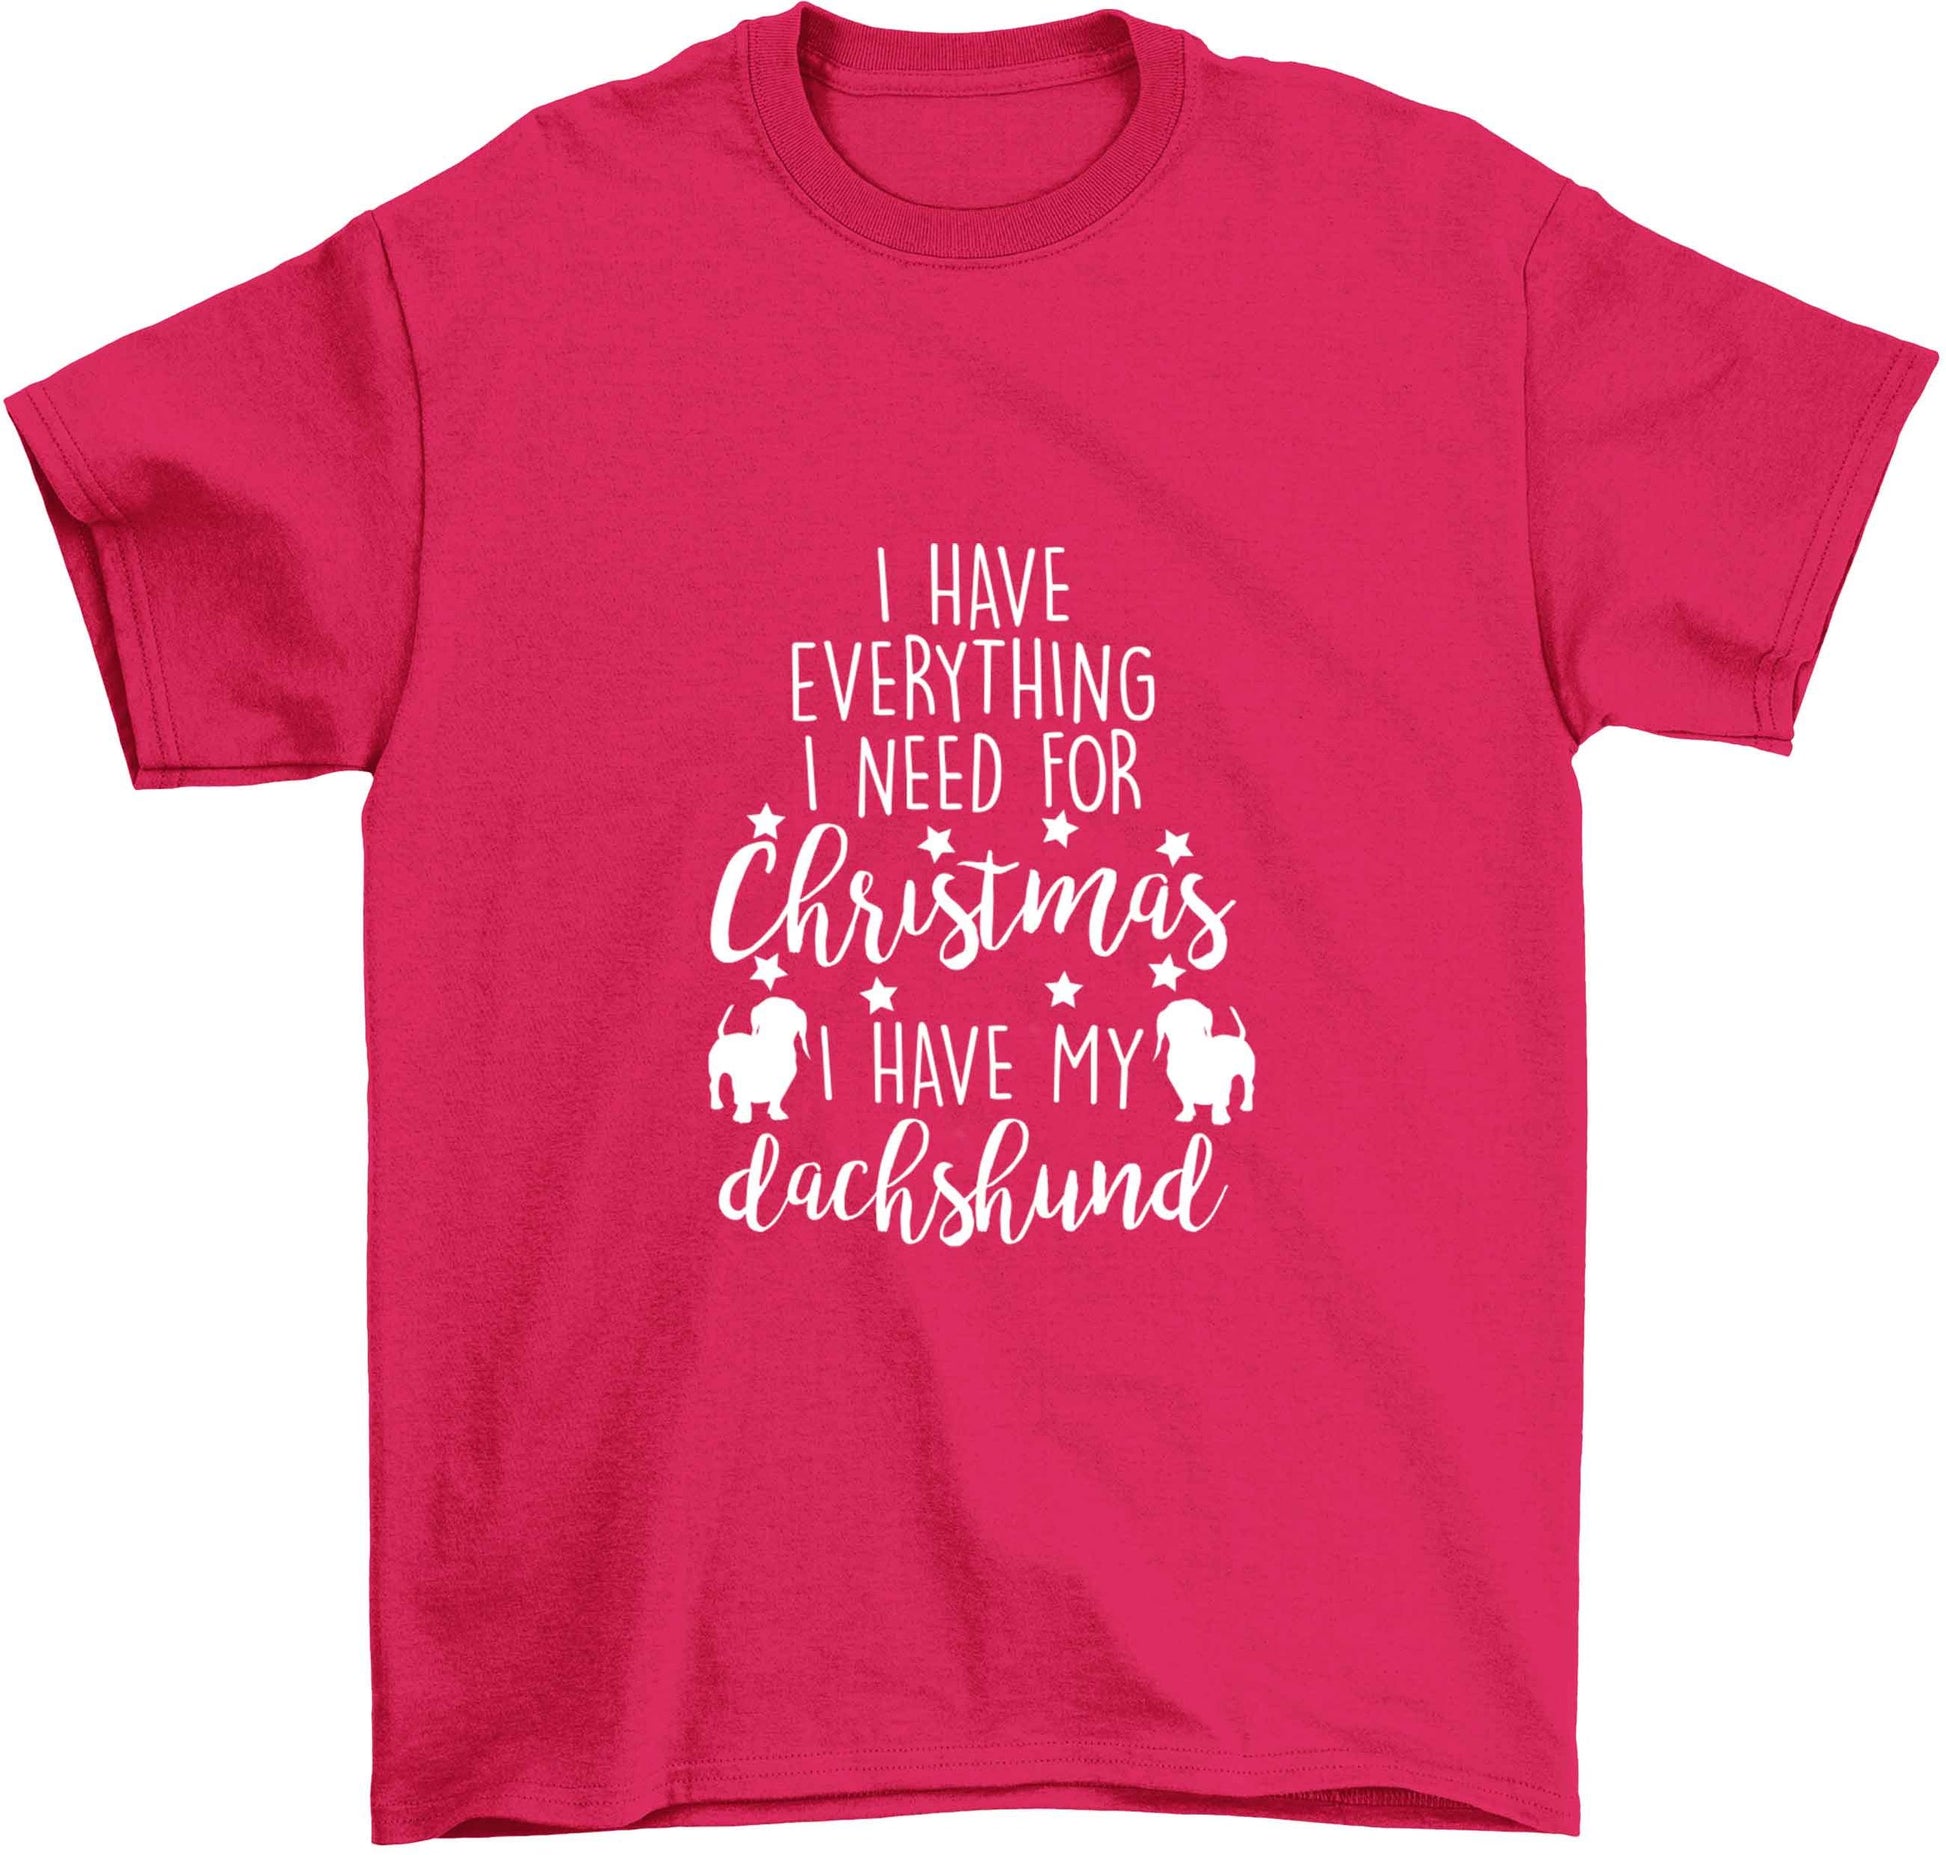 I have everything I need for Christmas I have my dachshund Children's pink Tshirt 12-13 Years